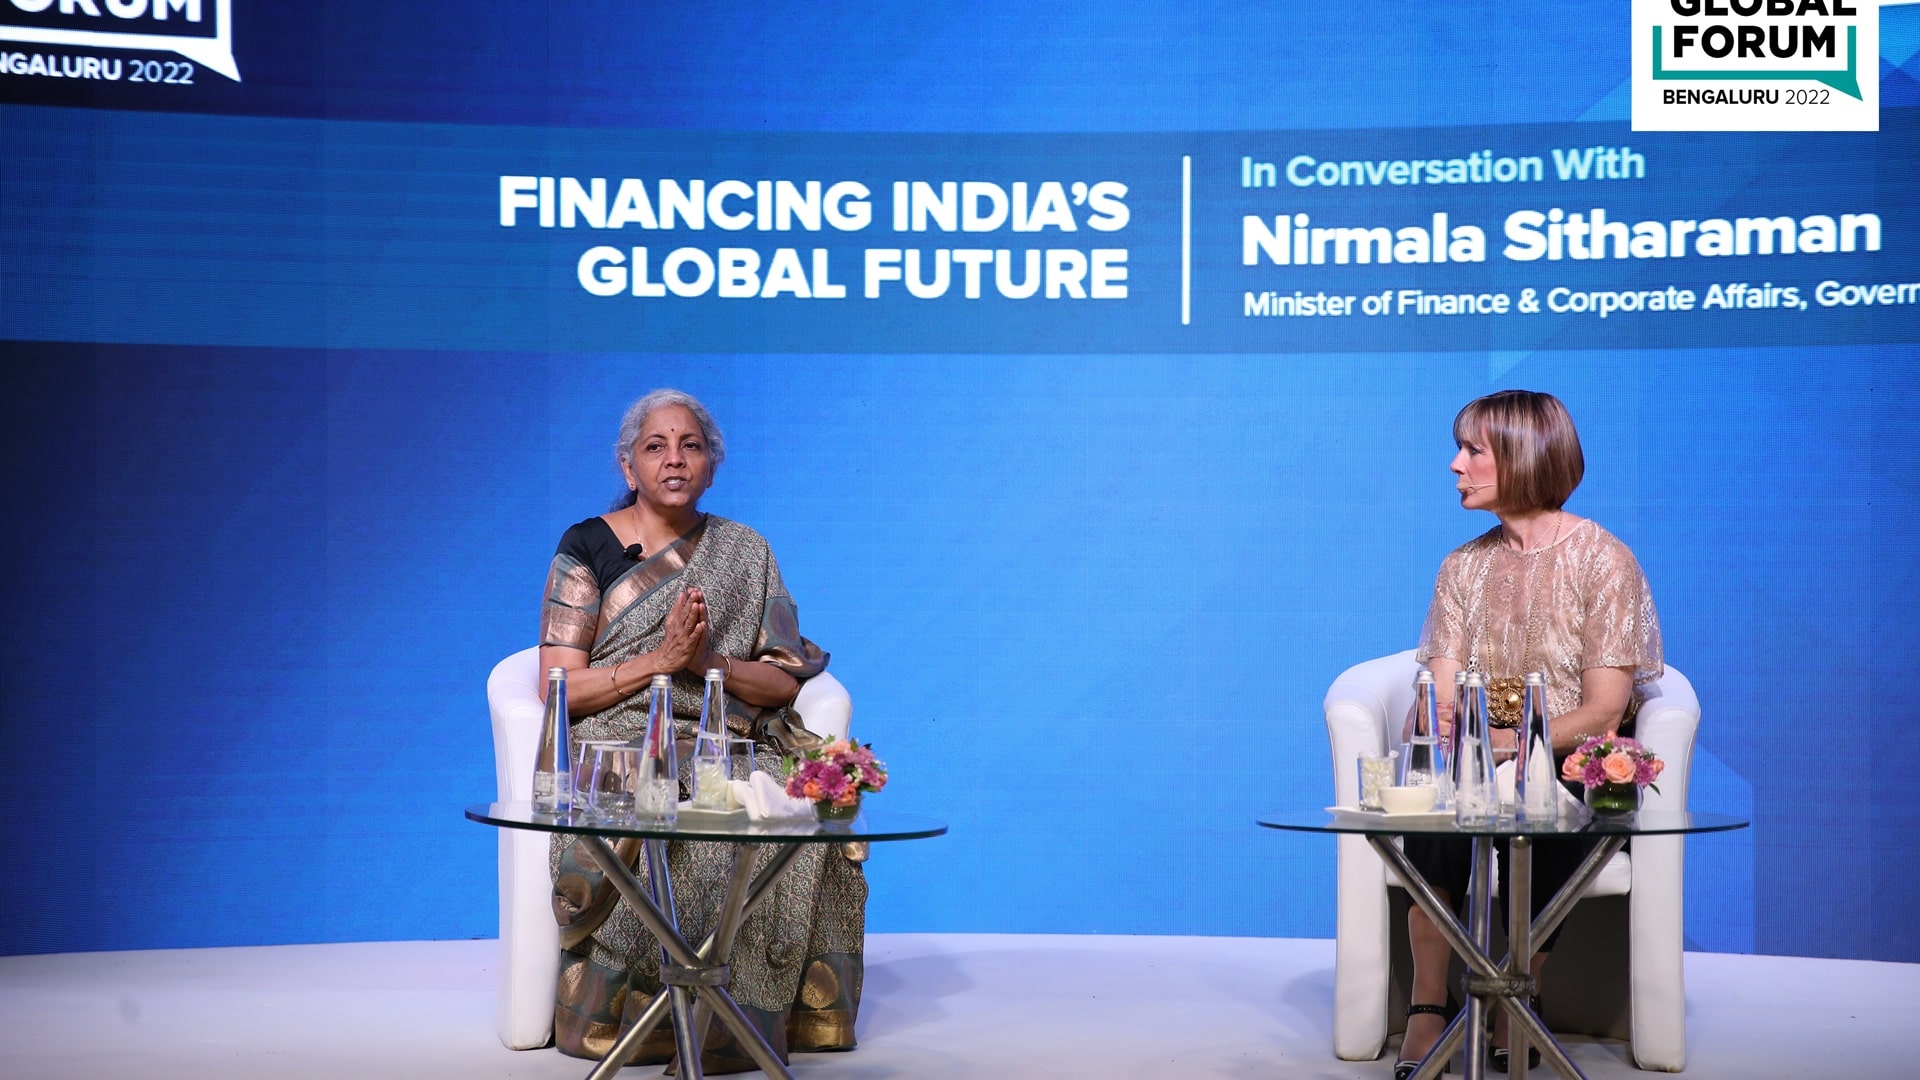 75 women entrepreneurs in India to be supported by India Global Forum